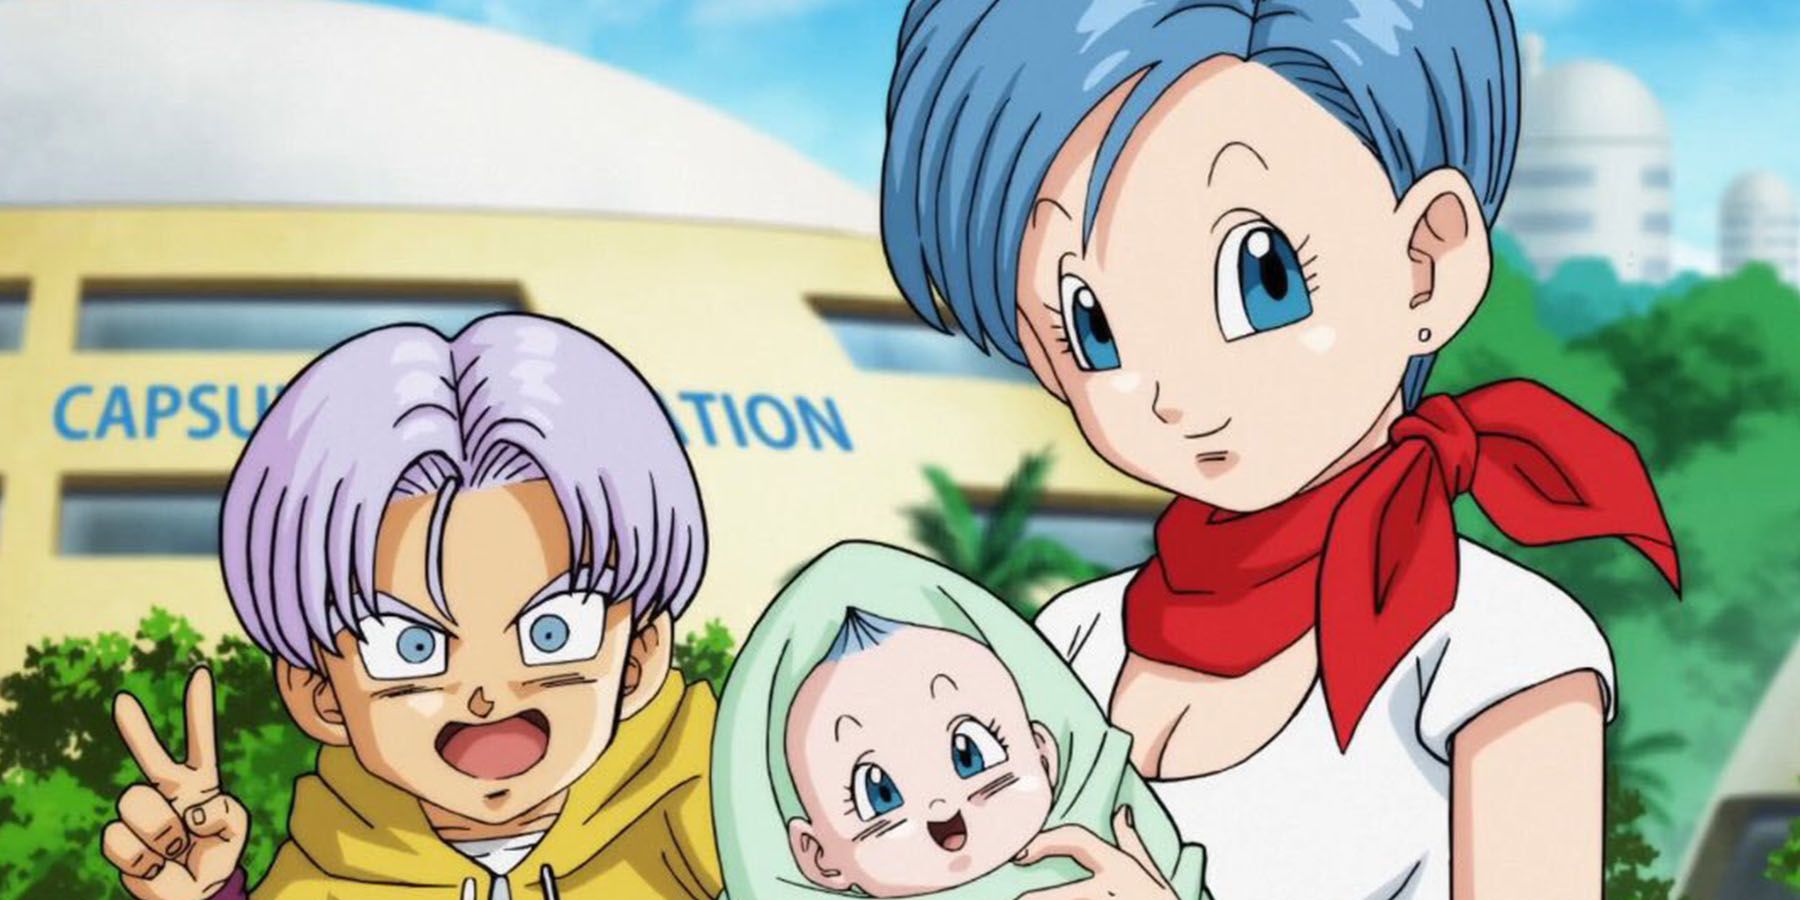 Bulma carries baby Bulla while Trunk does a peace sign